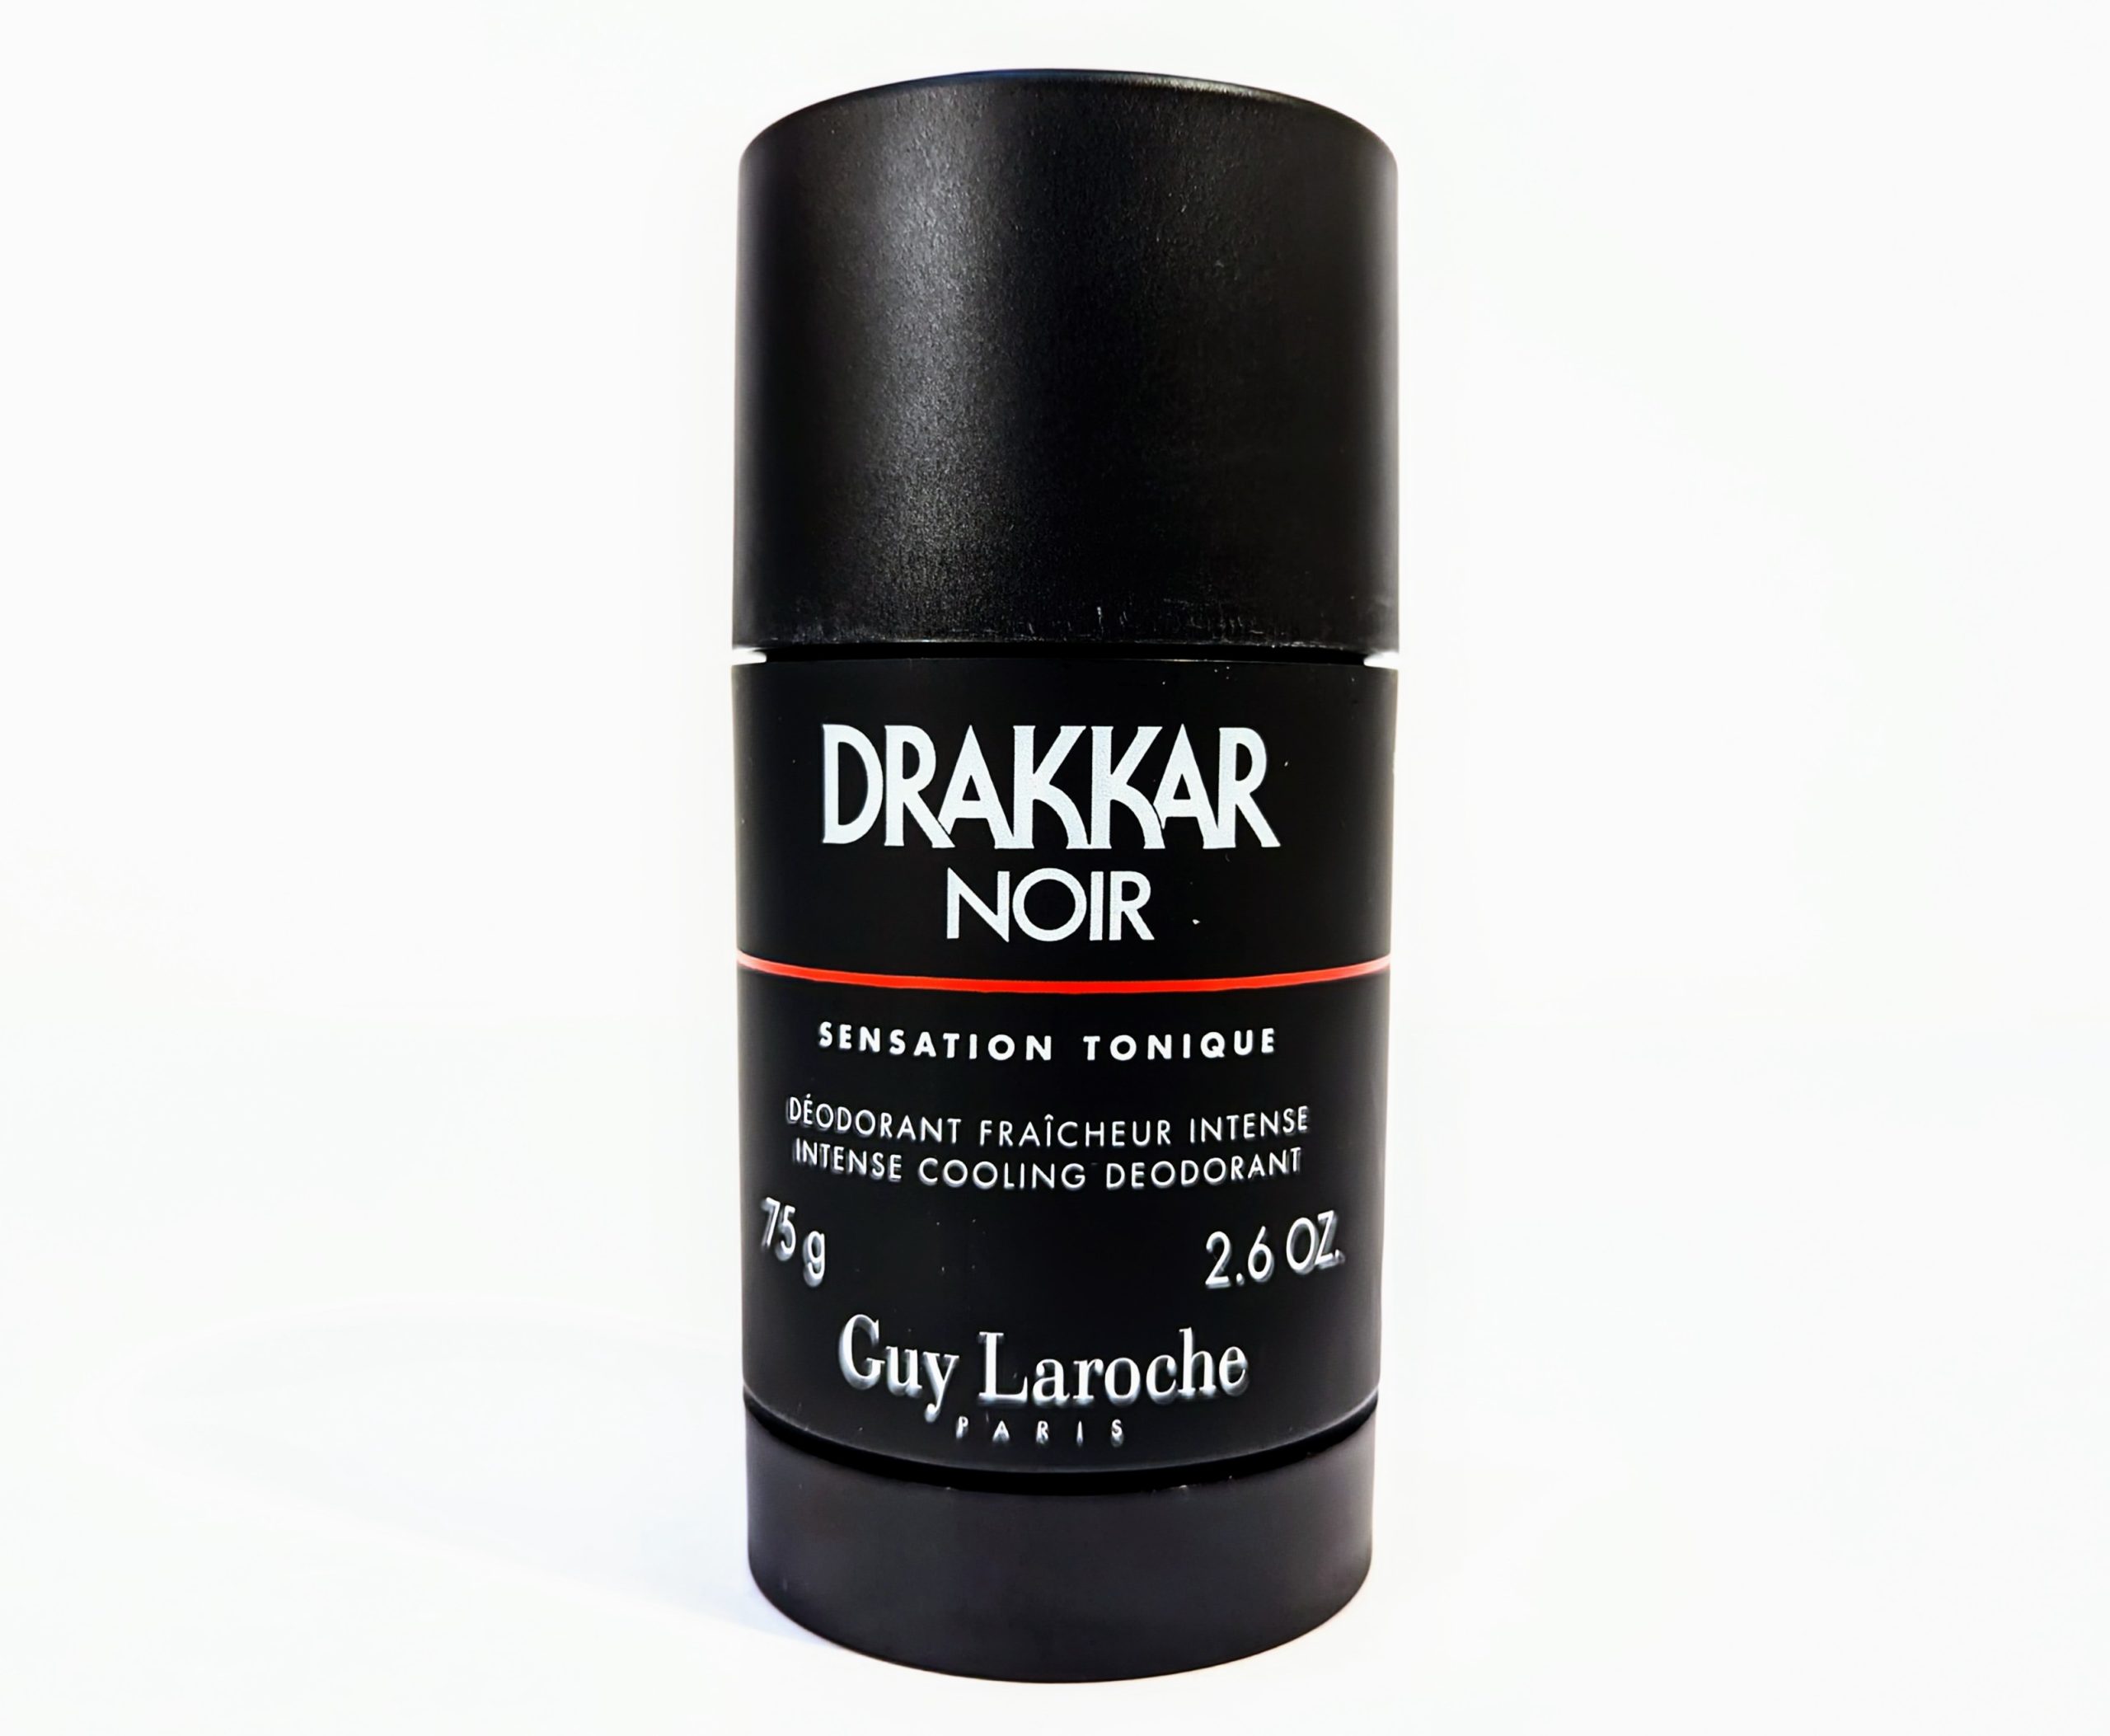 A black cylindrical container of Drakkar Noir deodorant by Guy Laroche, labeled “Sensation Tonique,” with a net weight of 75g (2.6 oz).